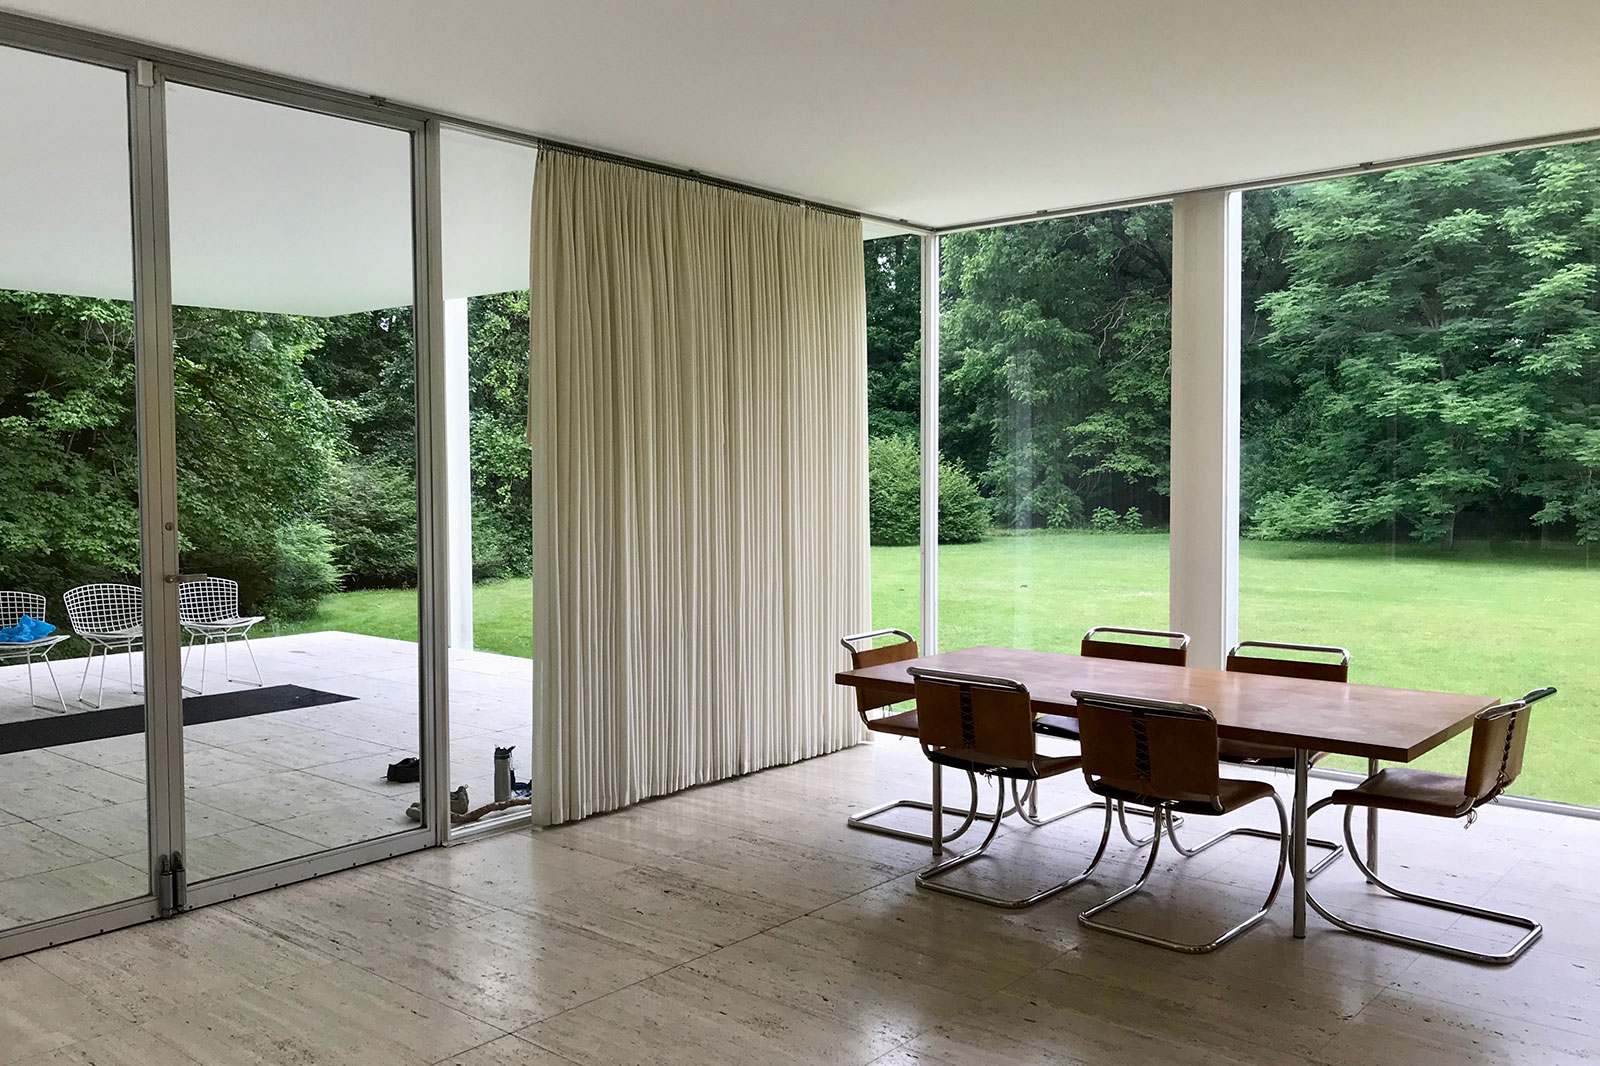 Dining table of the The Farnsworth House / Mies van der Rohe